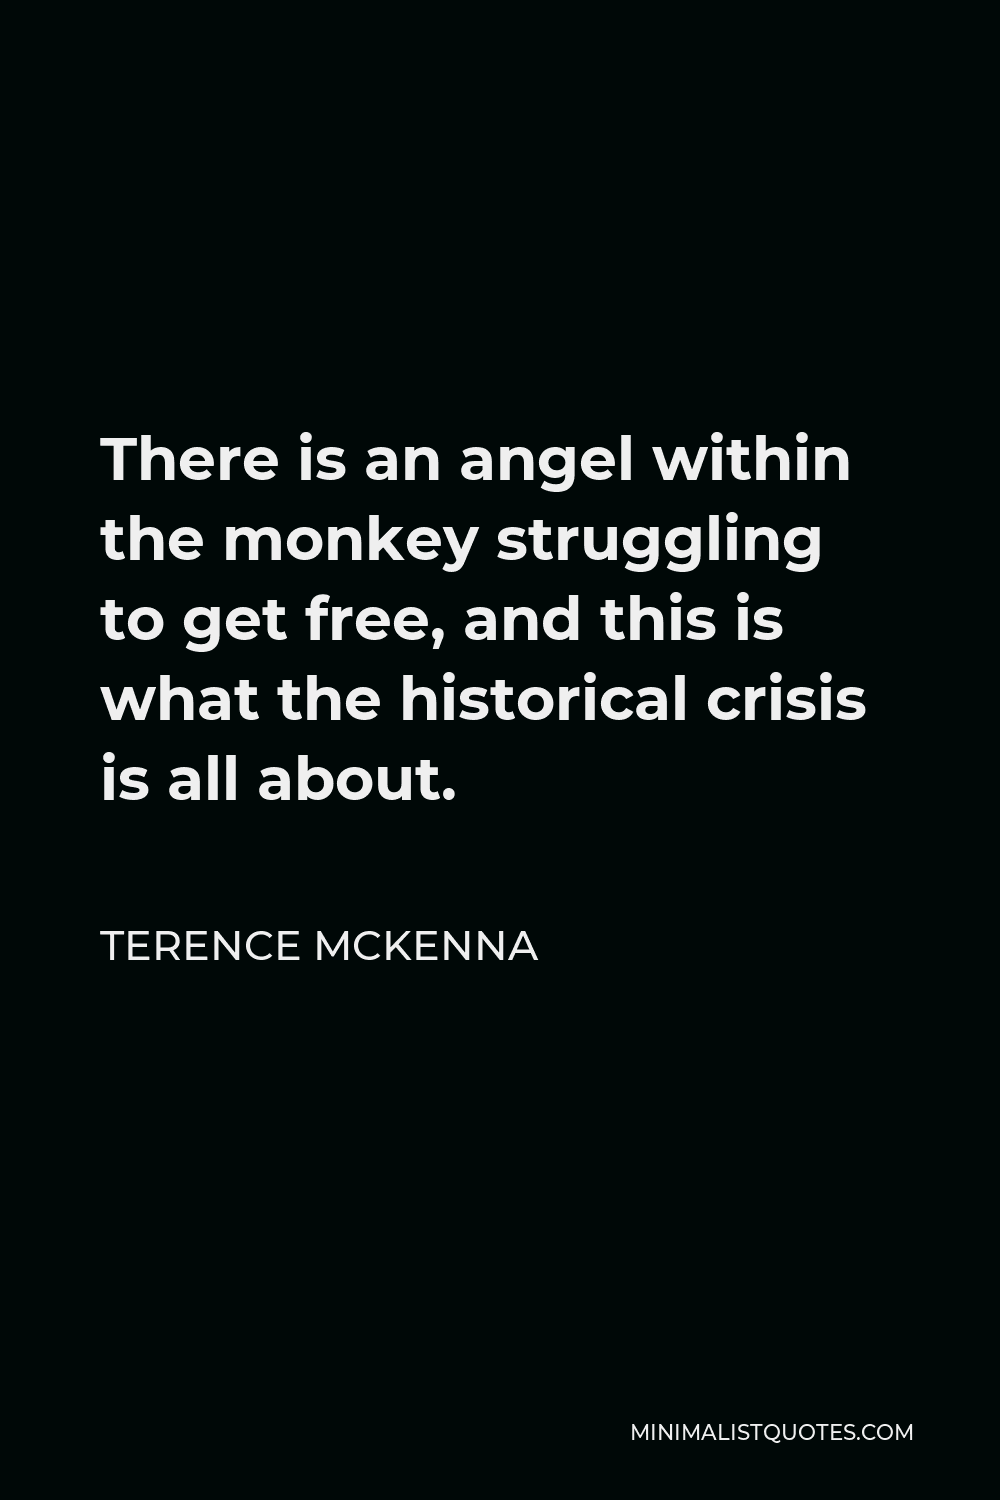 Terence McKenna Quote - There is an angel within the monkey struggling to get free, and this is what the historical crisis is all about.